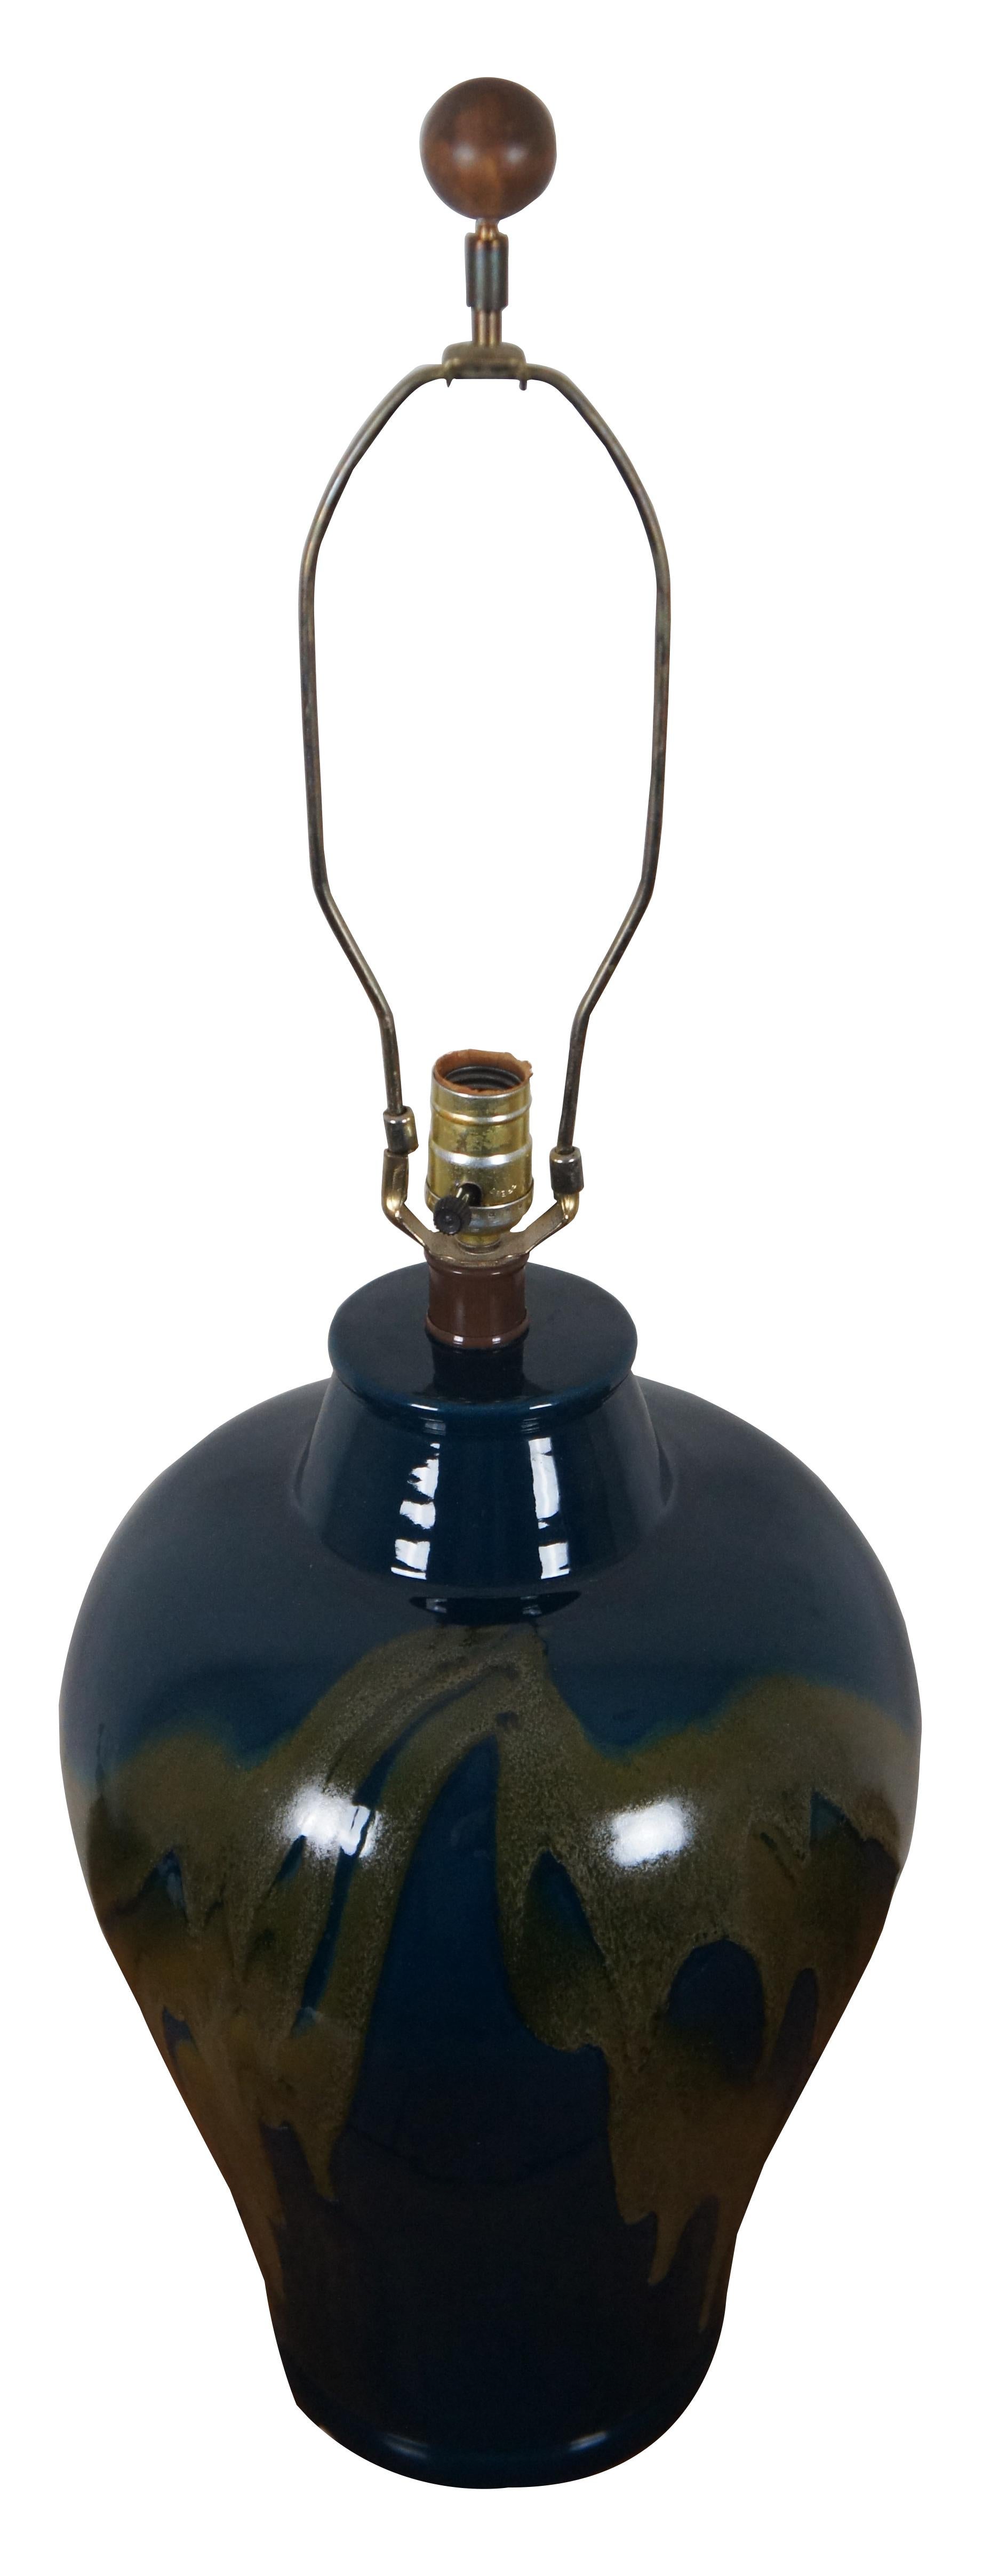 Vintage ginger jar shaped table lamp featuring a drip glaze of olive green over deep blue.

Measures: 12” x 21” / total height – 33” (diameter x height).
 